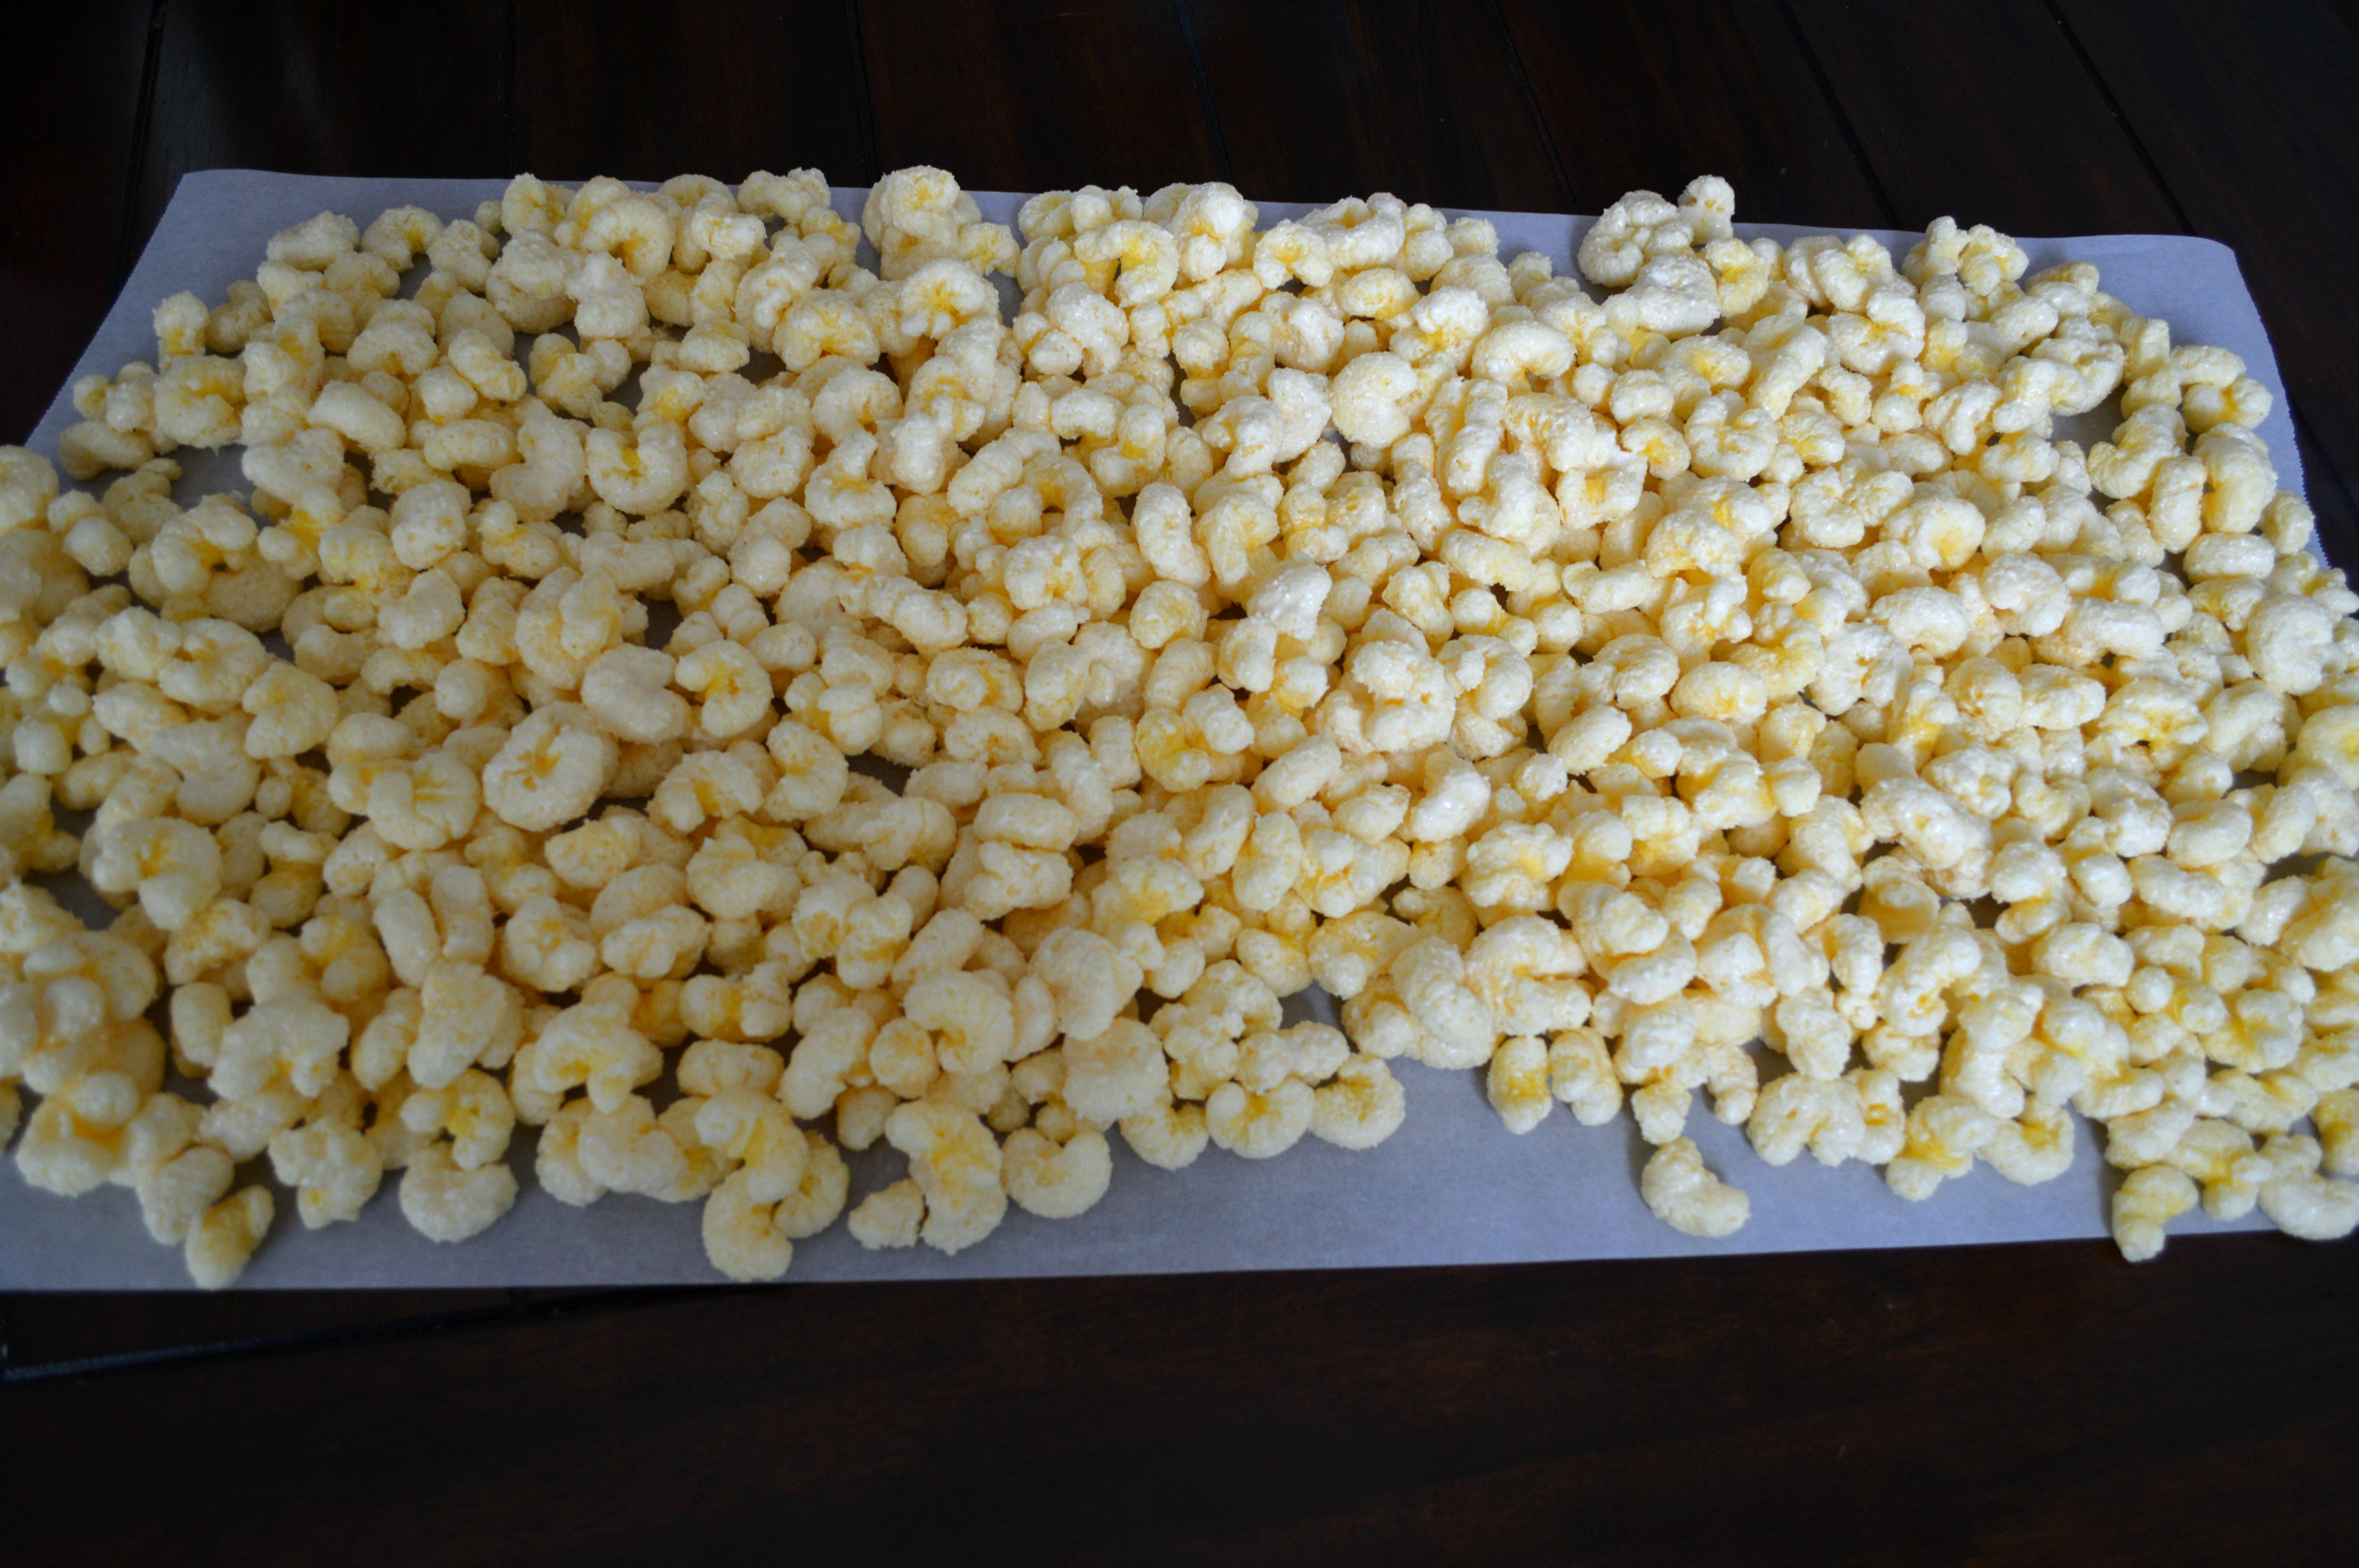 The Corn Puffs, Puff Corn or Corn Pops with the white chocolate chips stirred in completely and spread on a large piece of parchment paper or waxed paper to set up